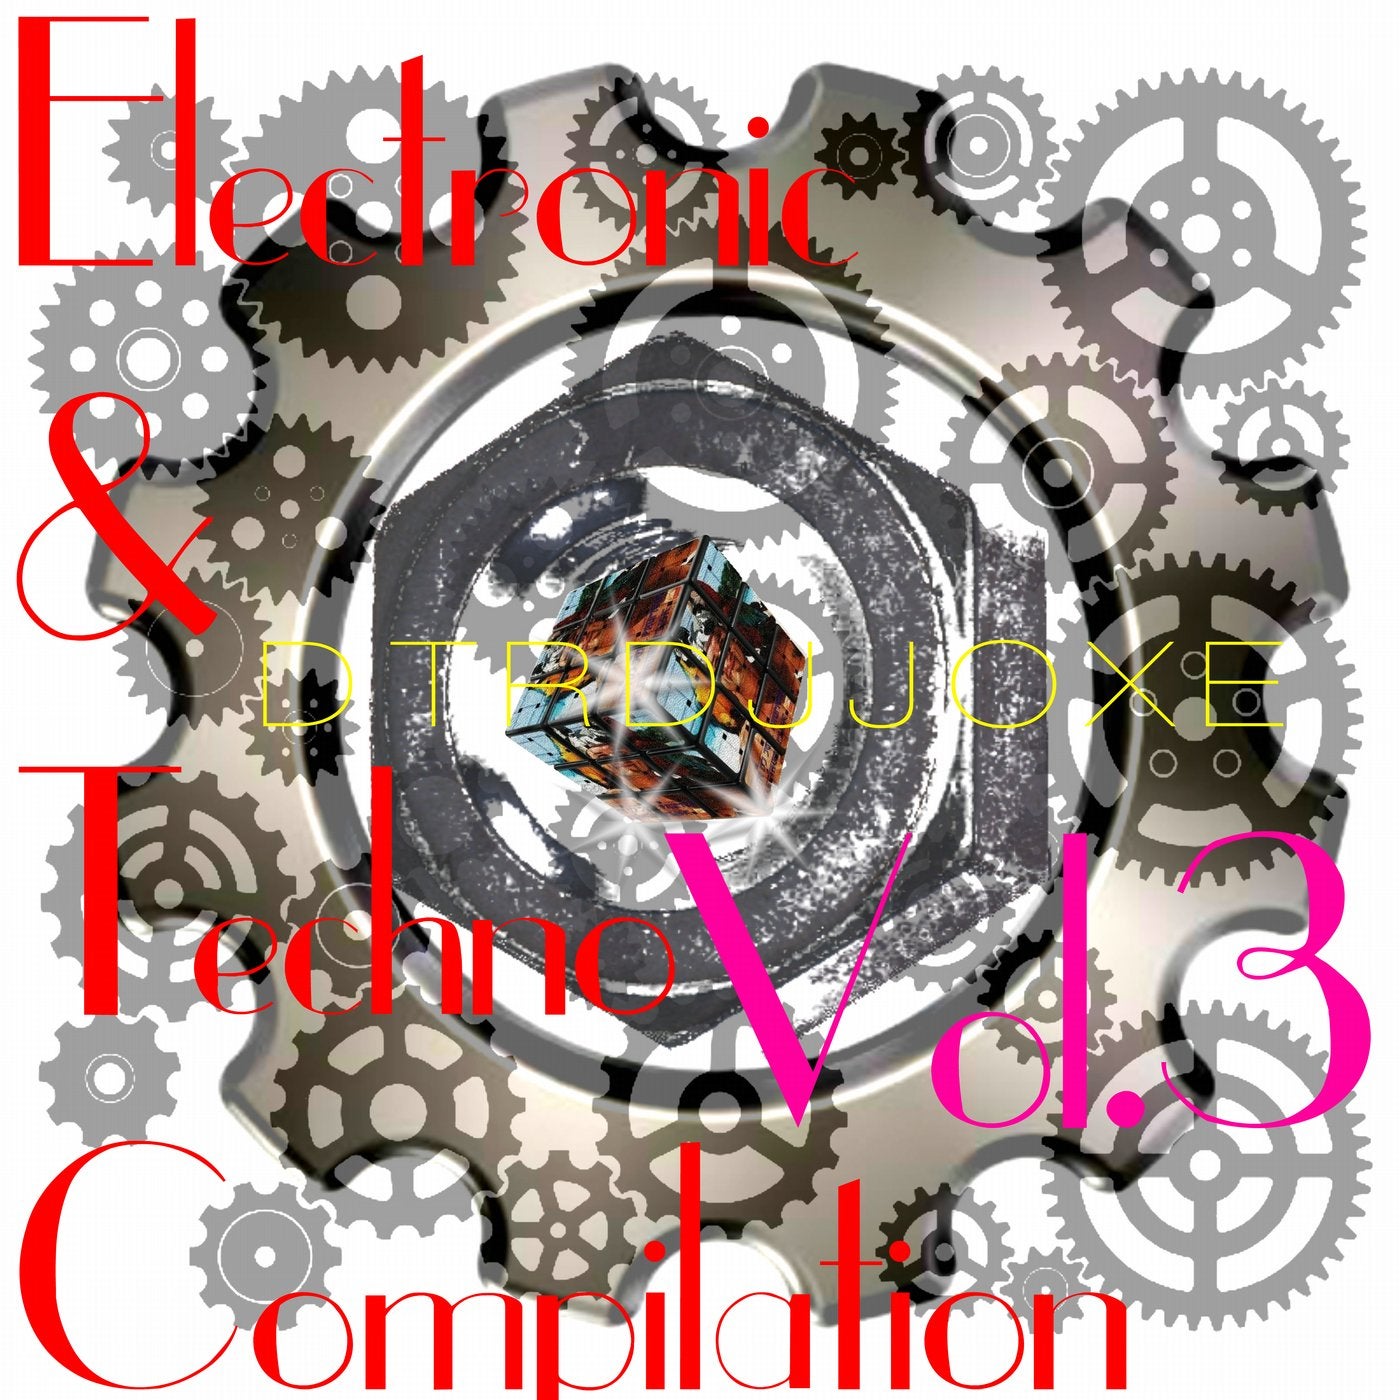 Electronic & Techno Compilation, Vol. 3